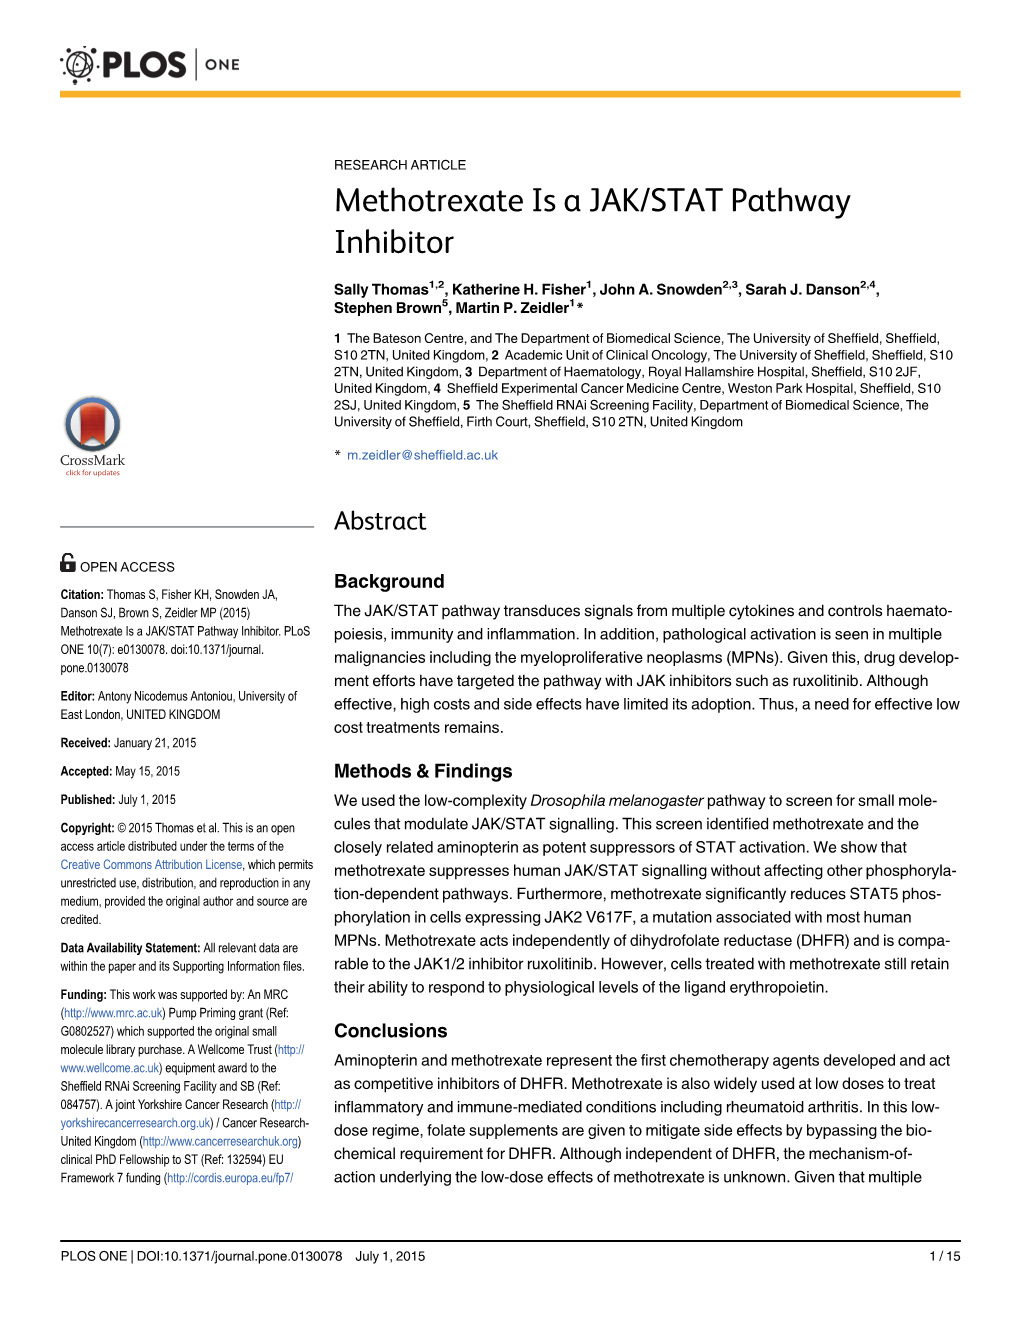 Methotrexate Is a JAK/STAT Pathway Inhibitor